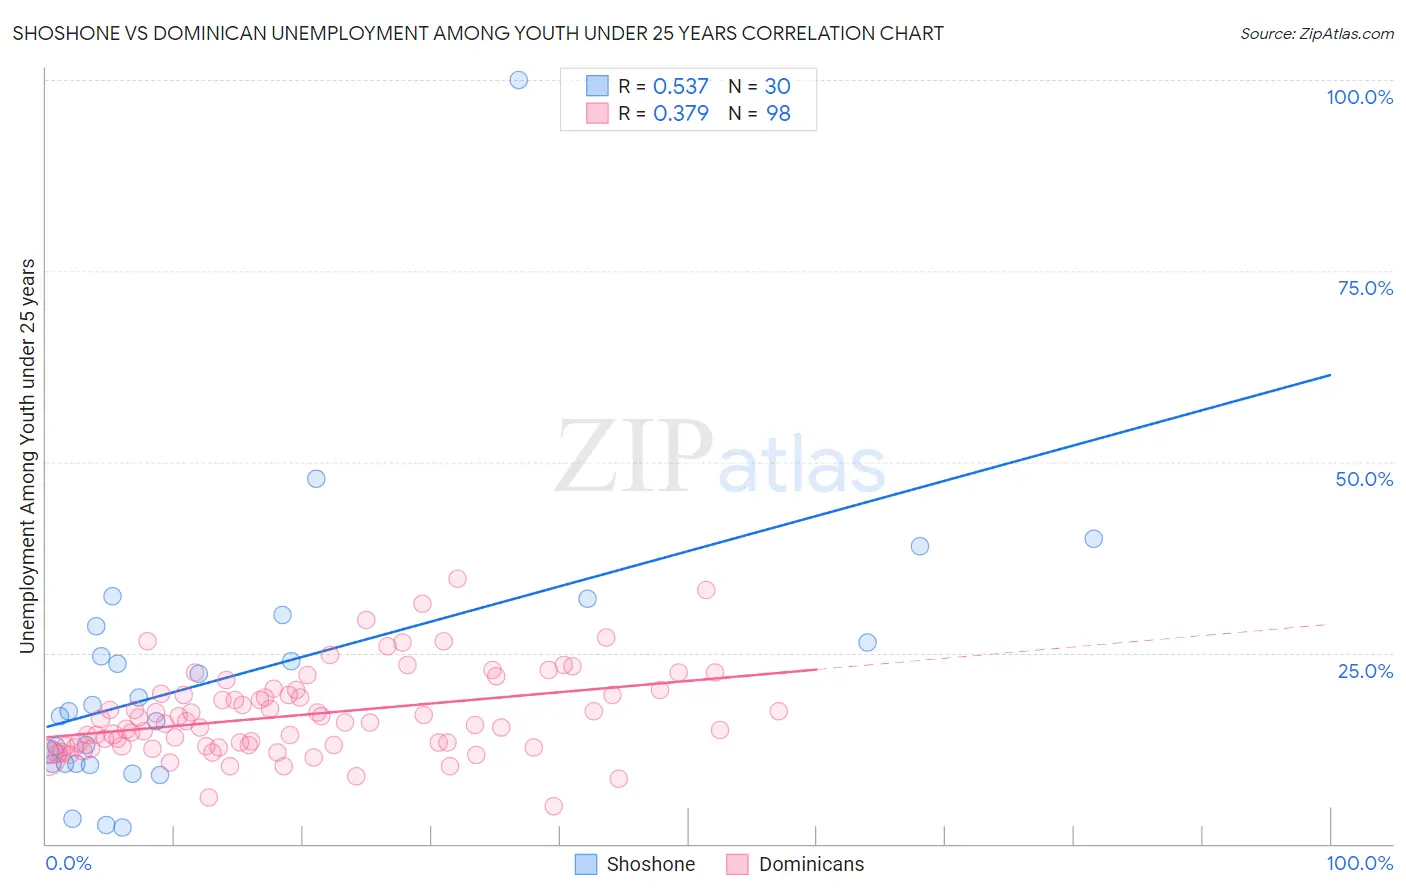 Shoshone vs Dominican Unemployment Among Youth under 25 years